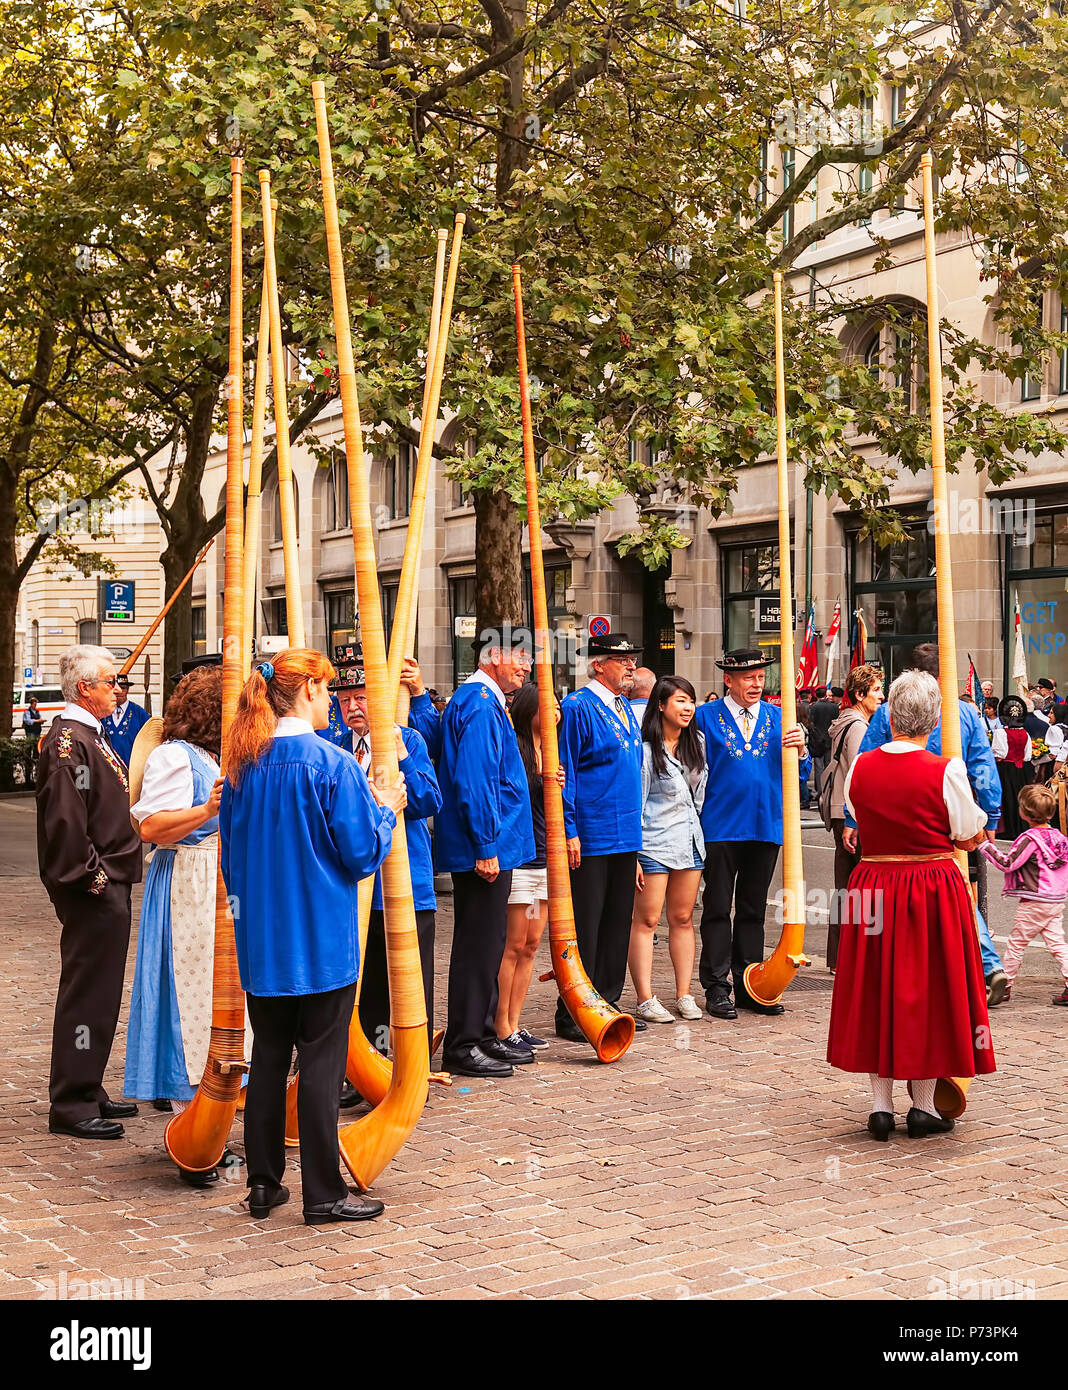 Zurich, Switzerland - August 1, 2014: participants of the parade devoted to the Swiss National Day The Swiss National Day is the national holiday of S Stock Photo